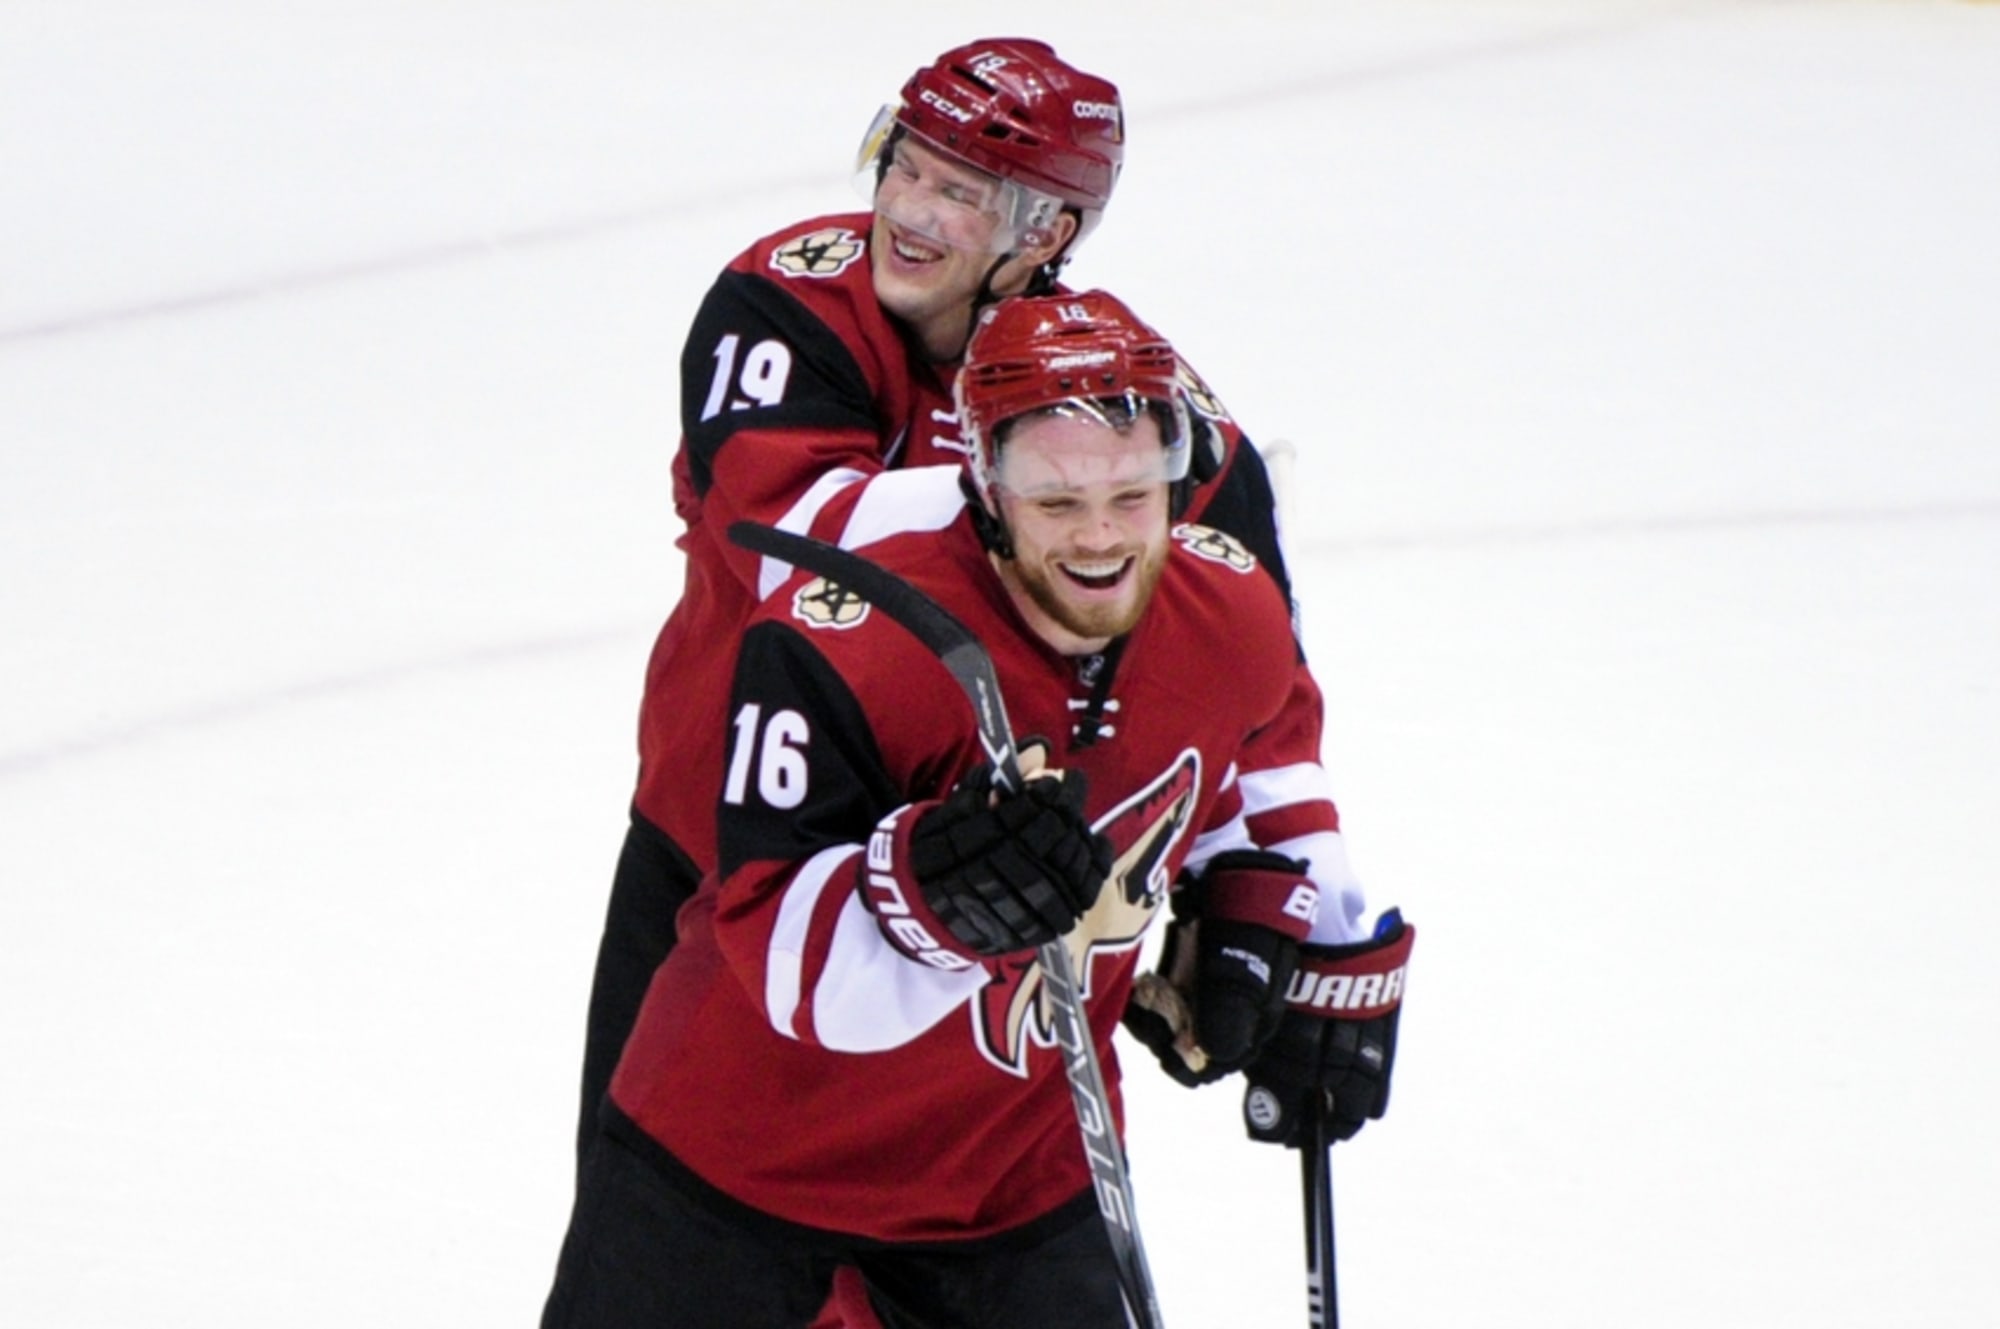 Max Domi after a goal in the gold medal game of the 2015 IIHF WJC